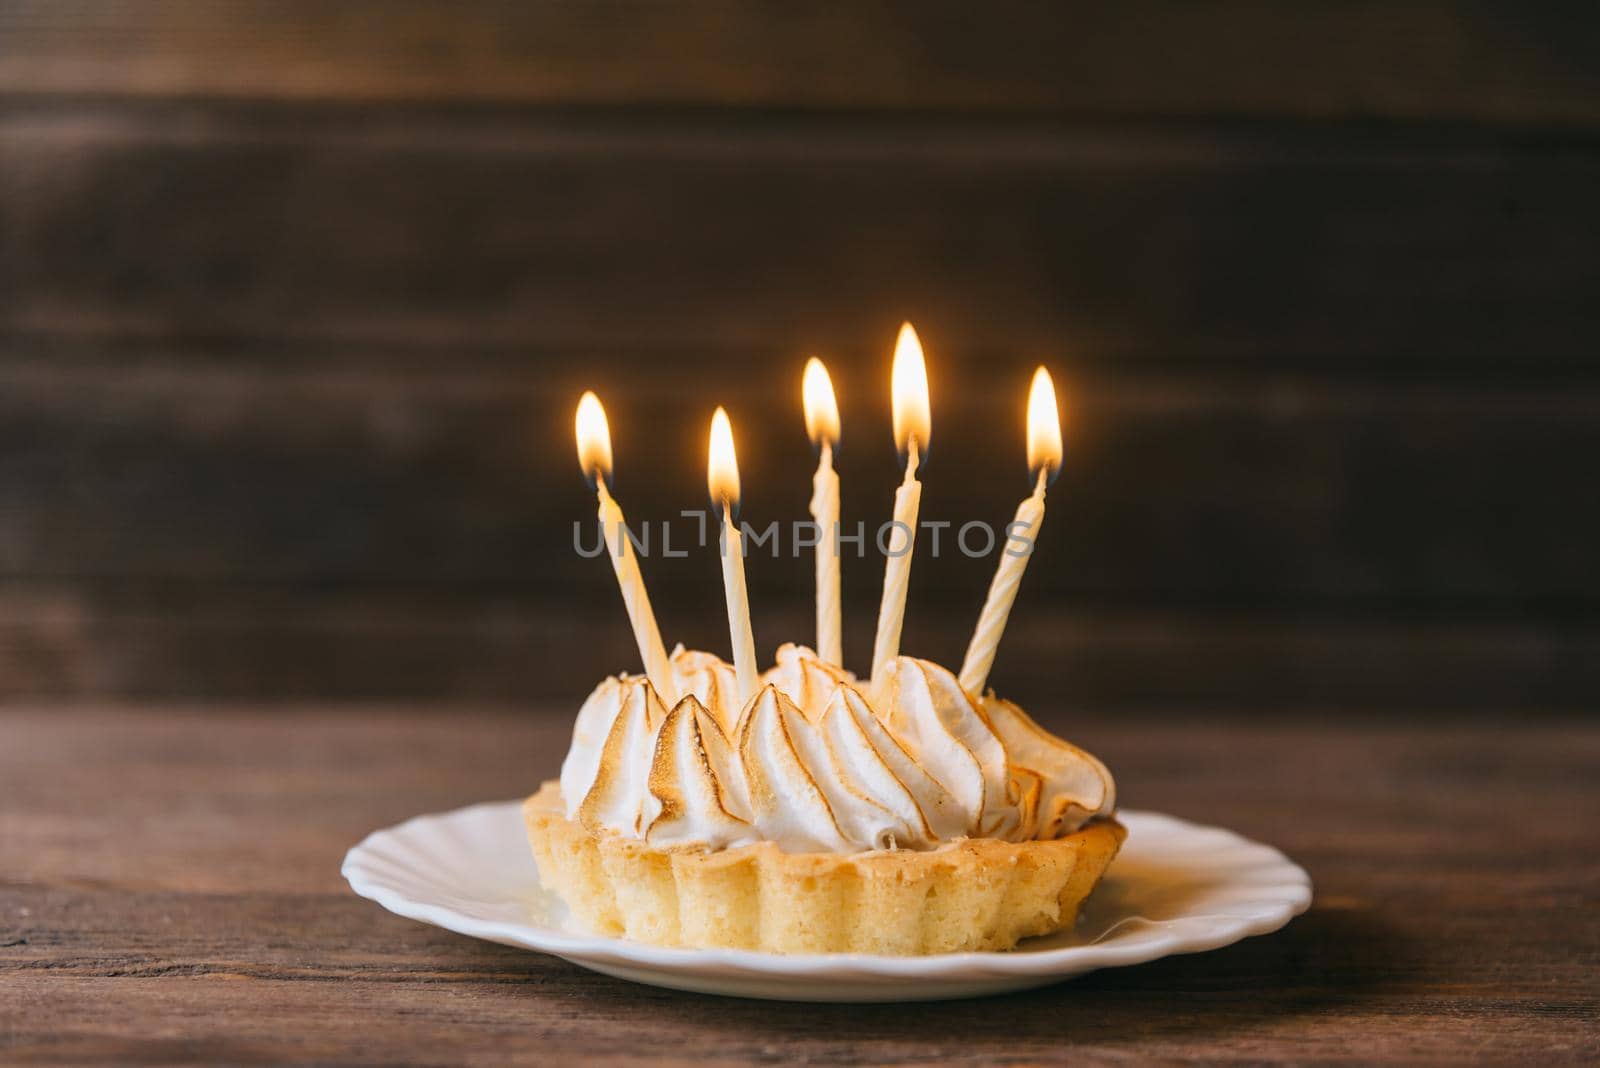 Birthday cupcake with five candles on a plate on wooden background.